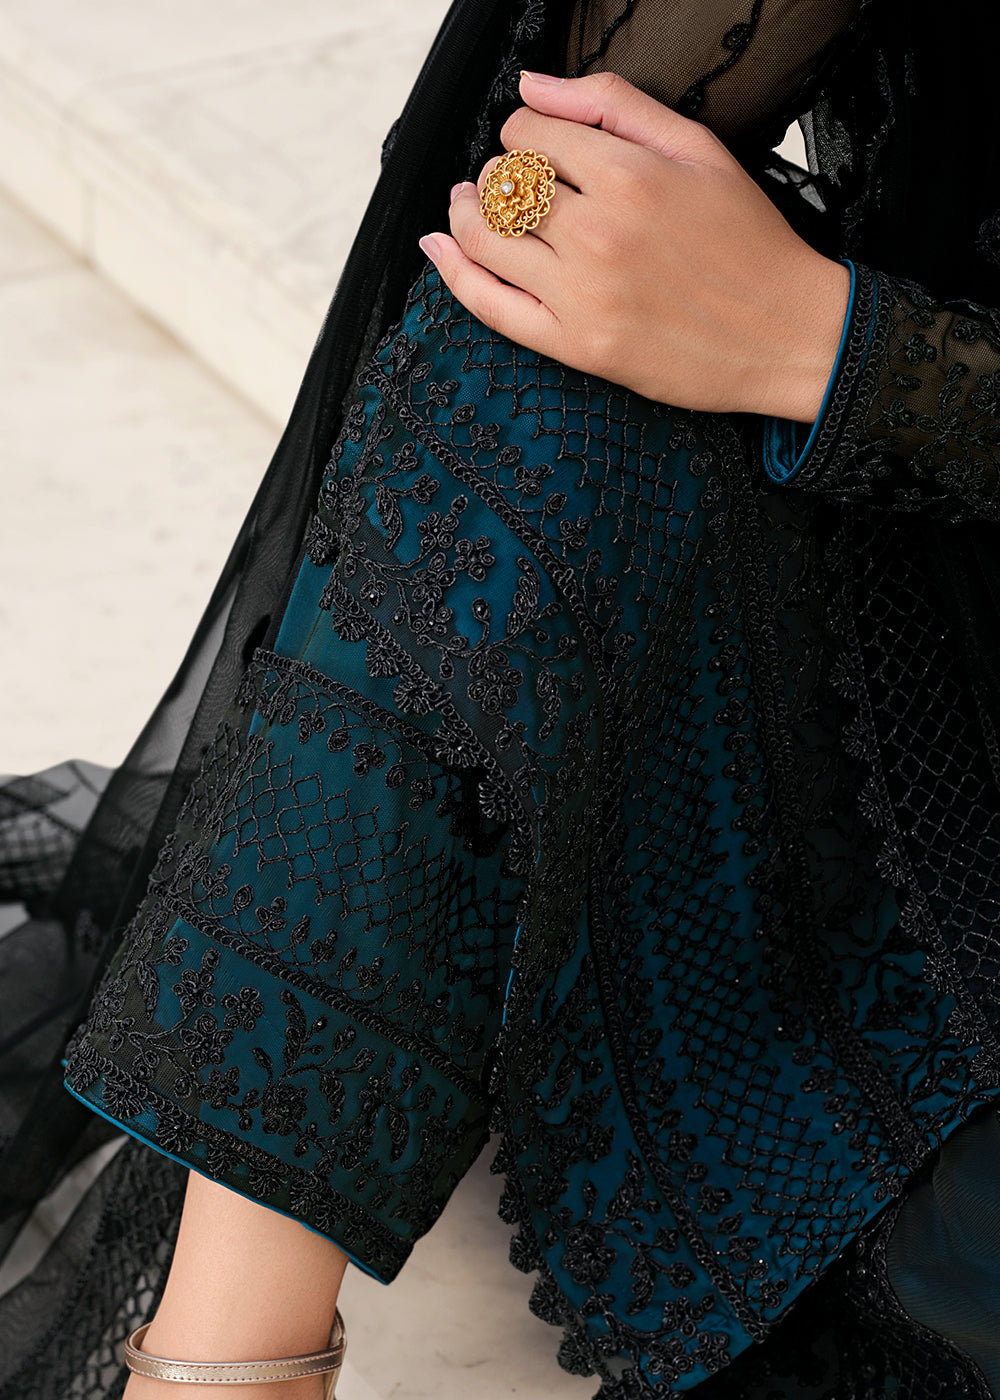 Black Embroidered Pant Suit